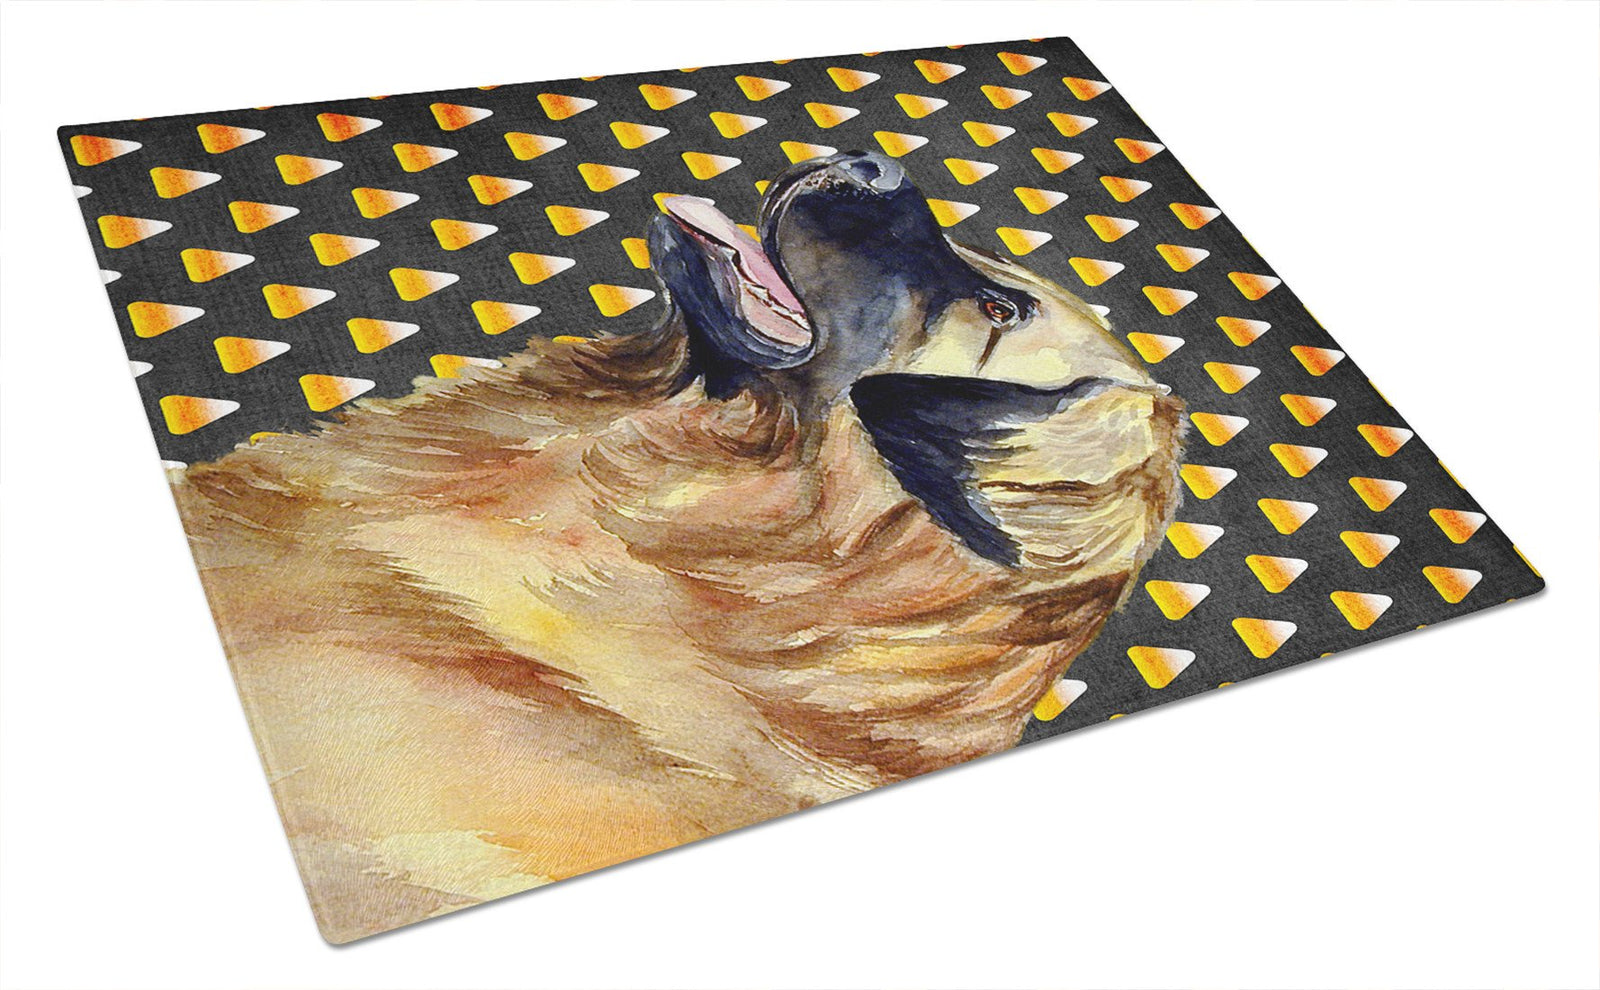 Leonberger Candy Corn Halloween Portrait Glass Cutting Board Large by Caroline's Treasures